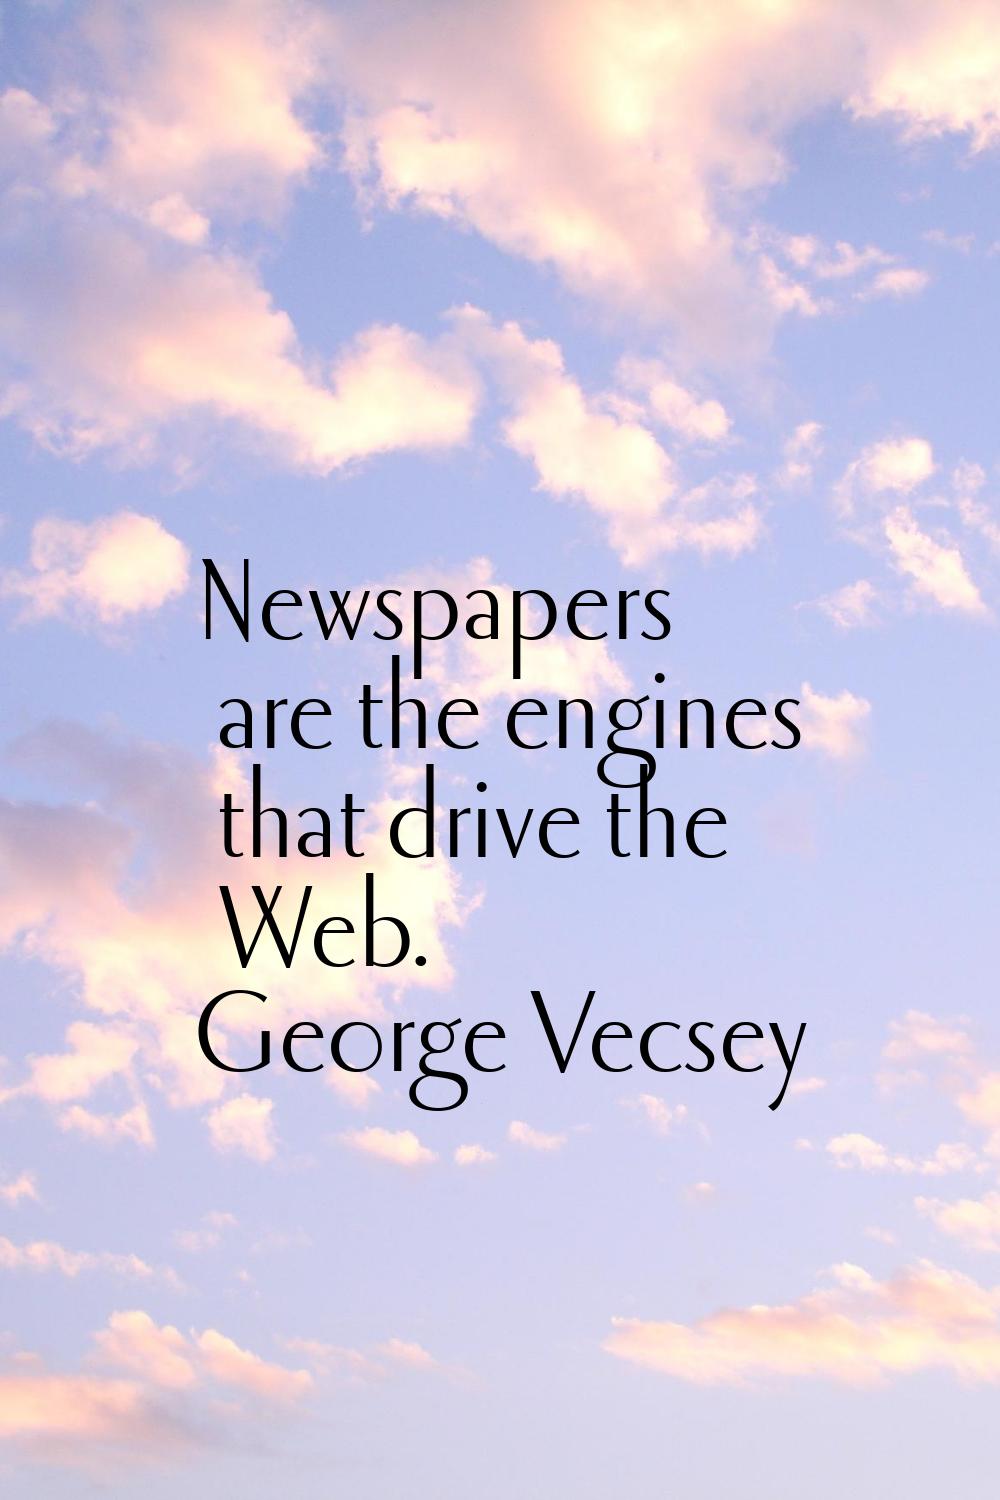 Newspapers are the engines that drive the Web.